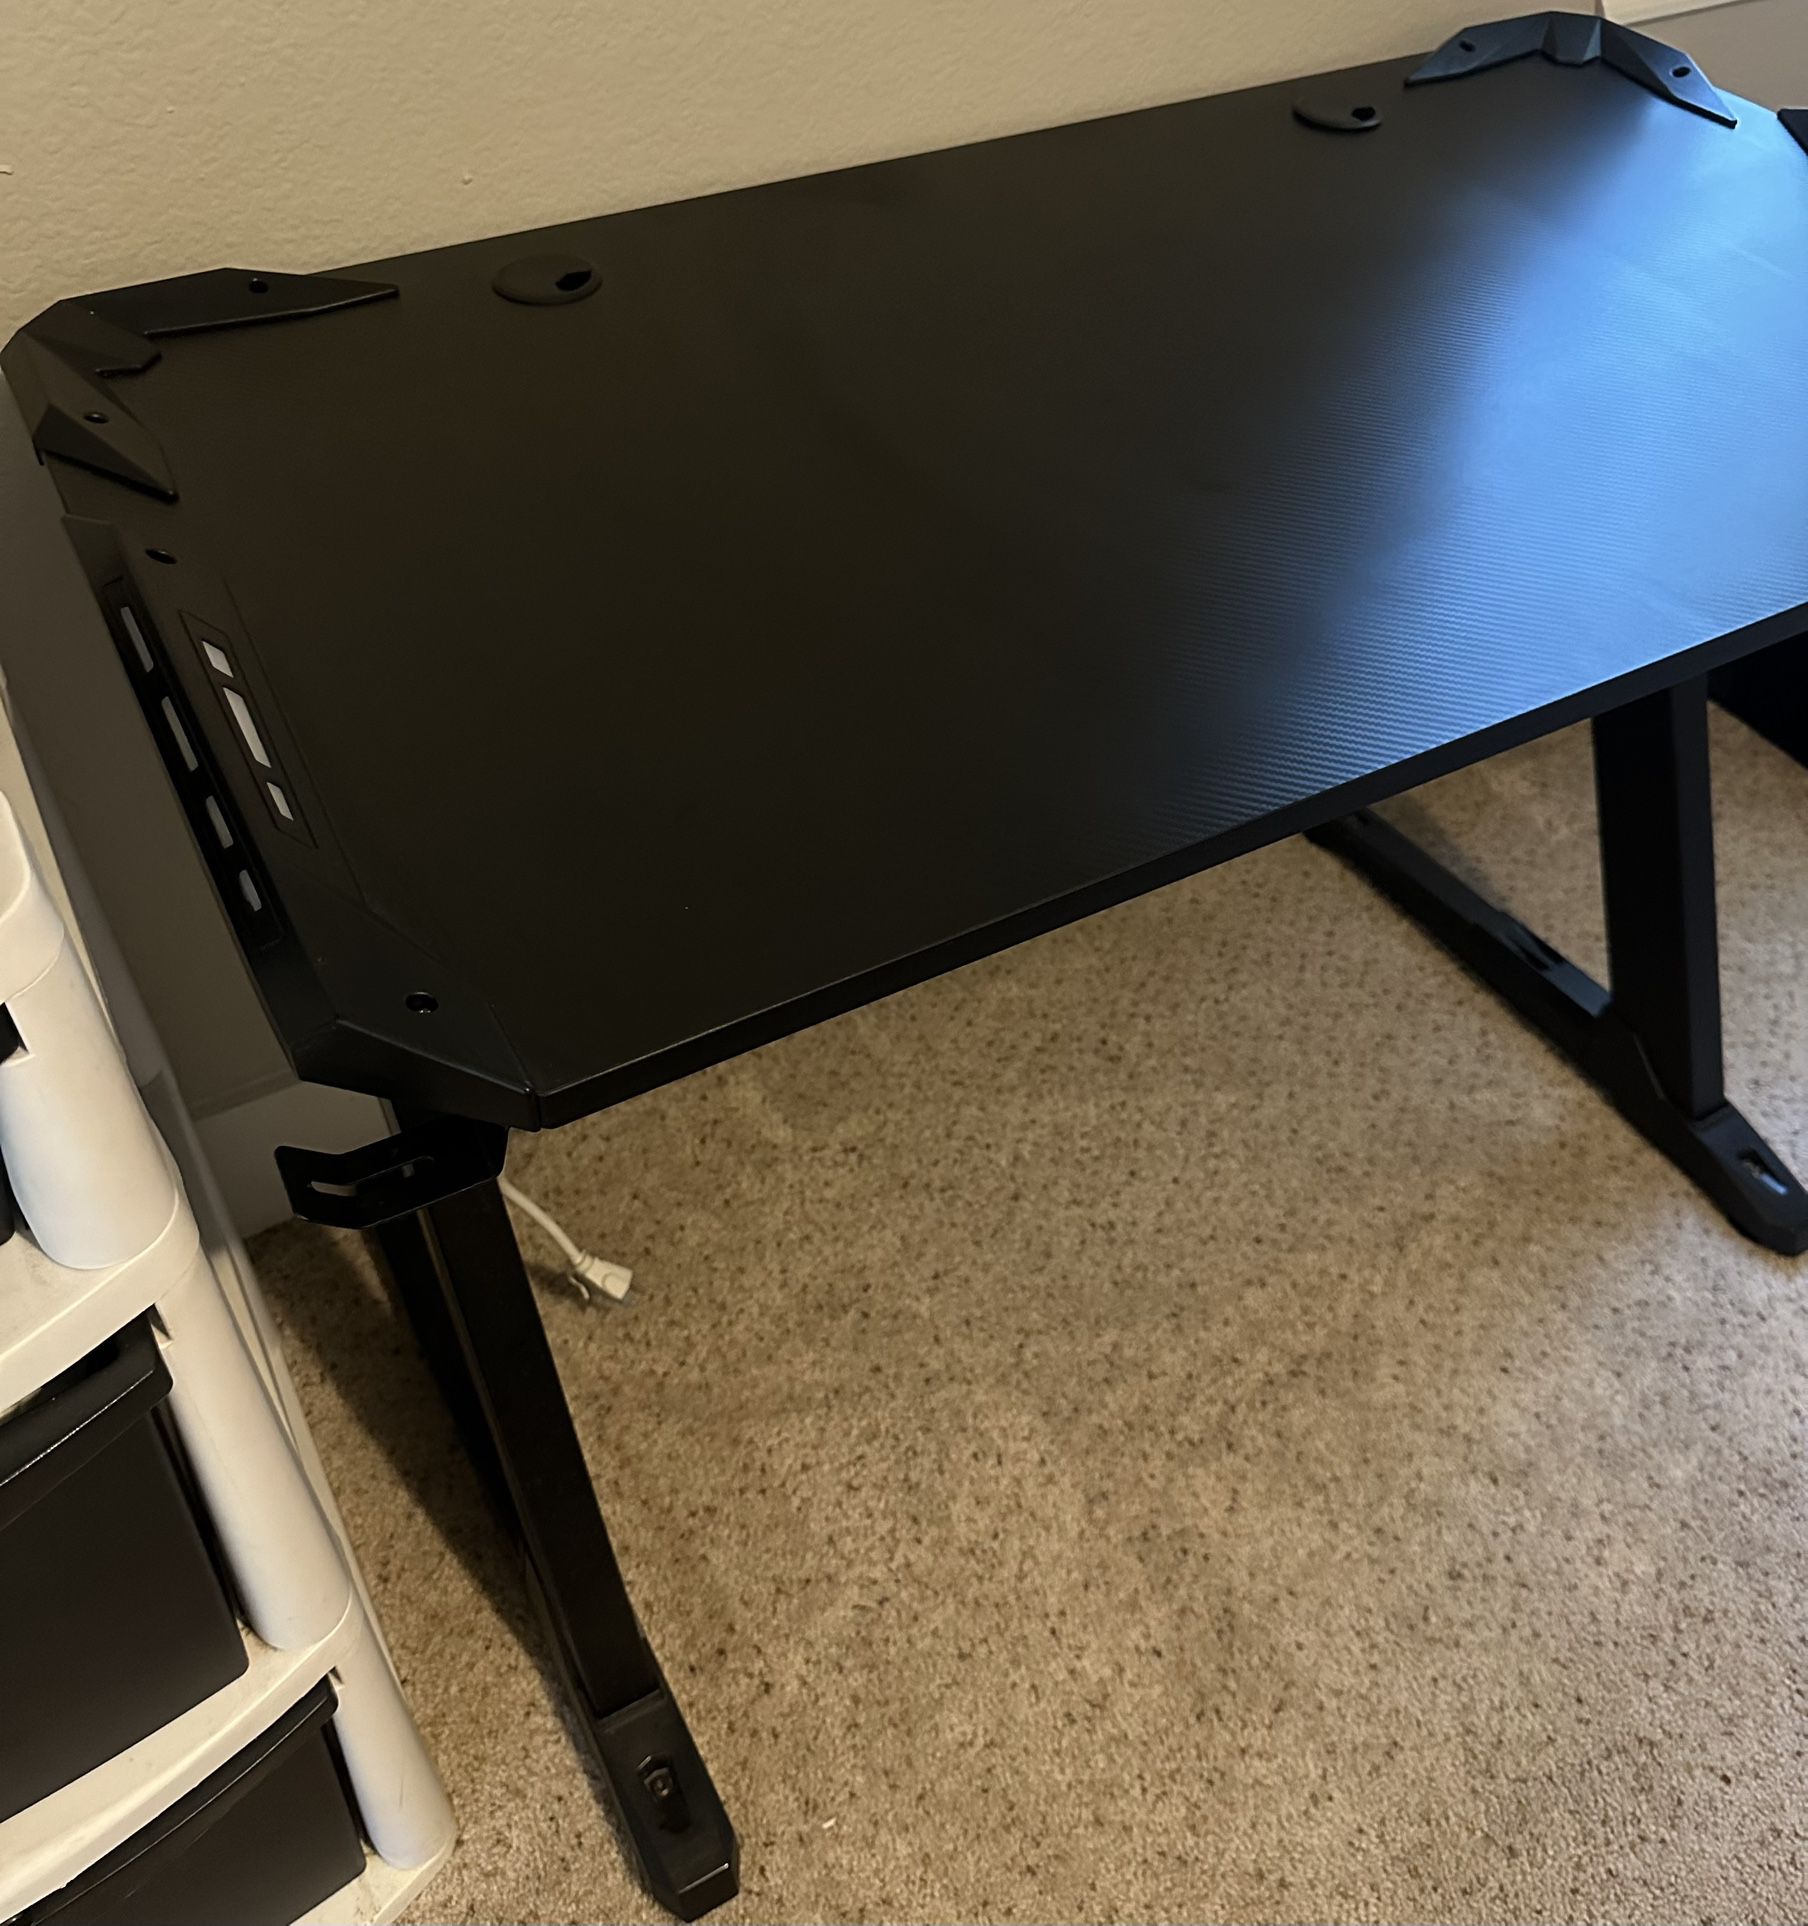 Gaming Desk, Computer with Carbon Fiber Surface, Blue LED Lights, Gaming Table Z Shaped Legs, Cup Holder and Headphone Hook (44 inch, Black)